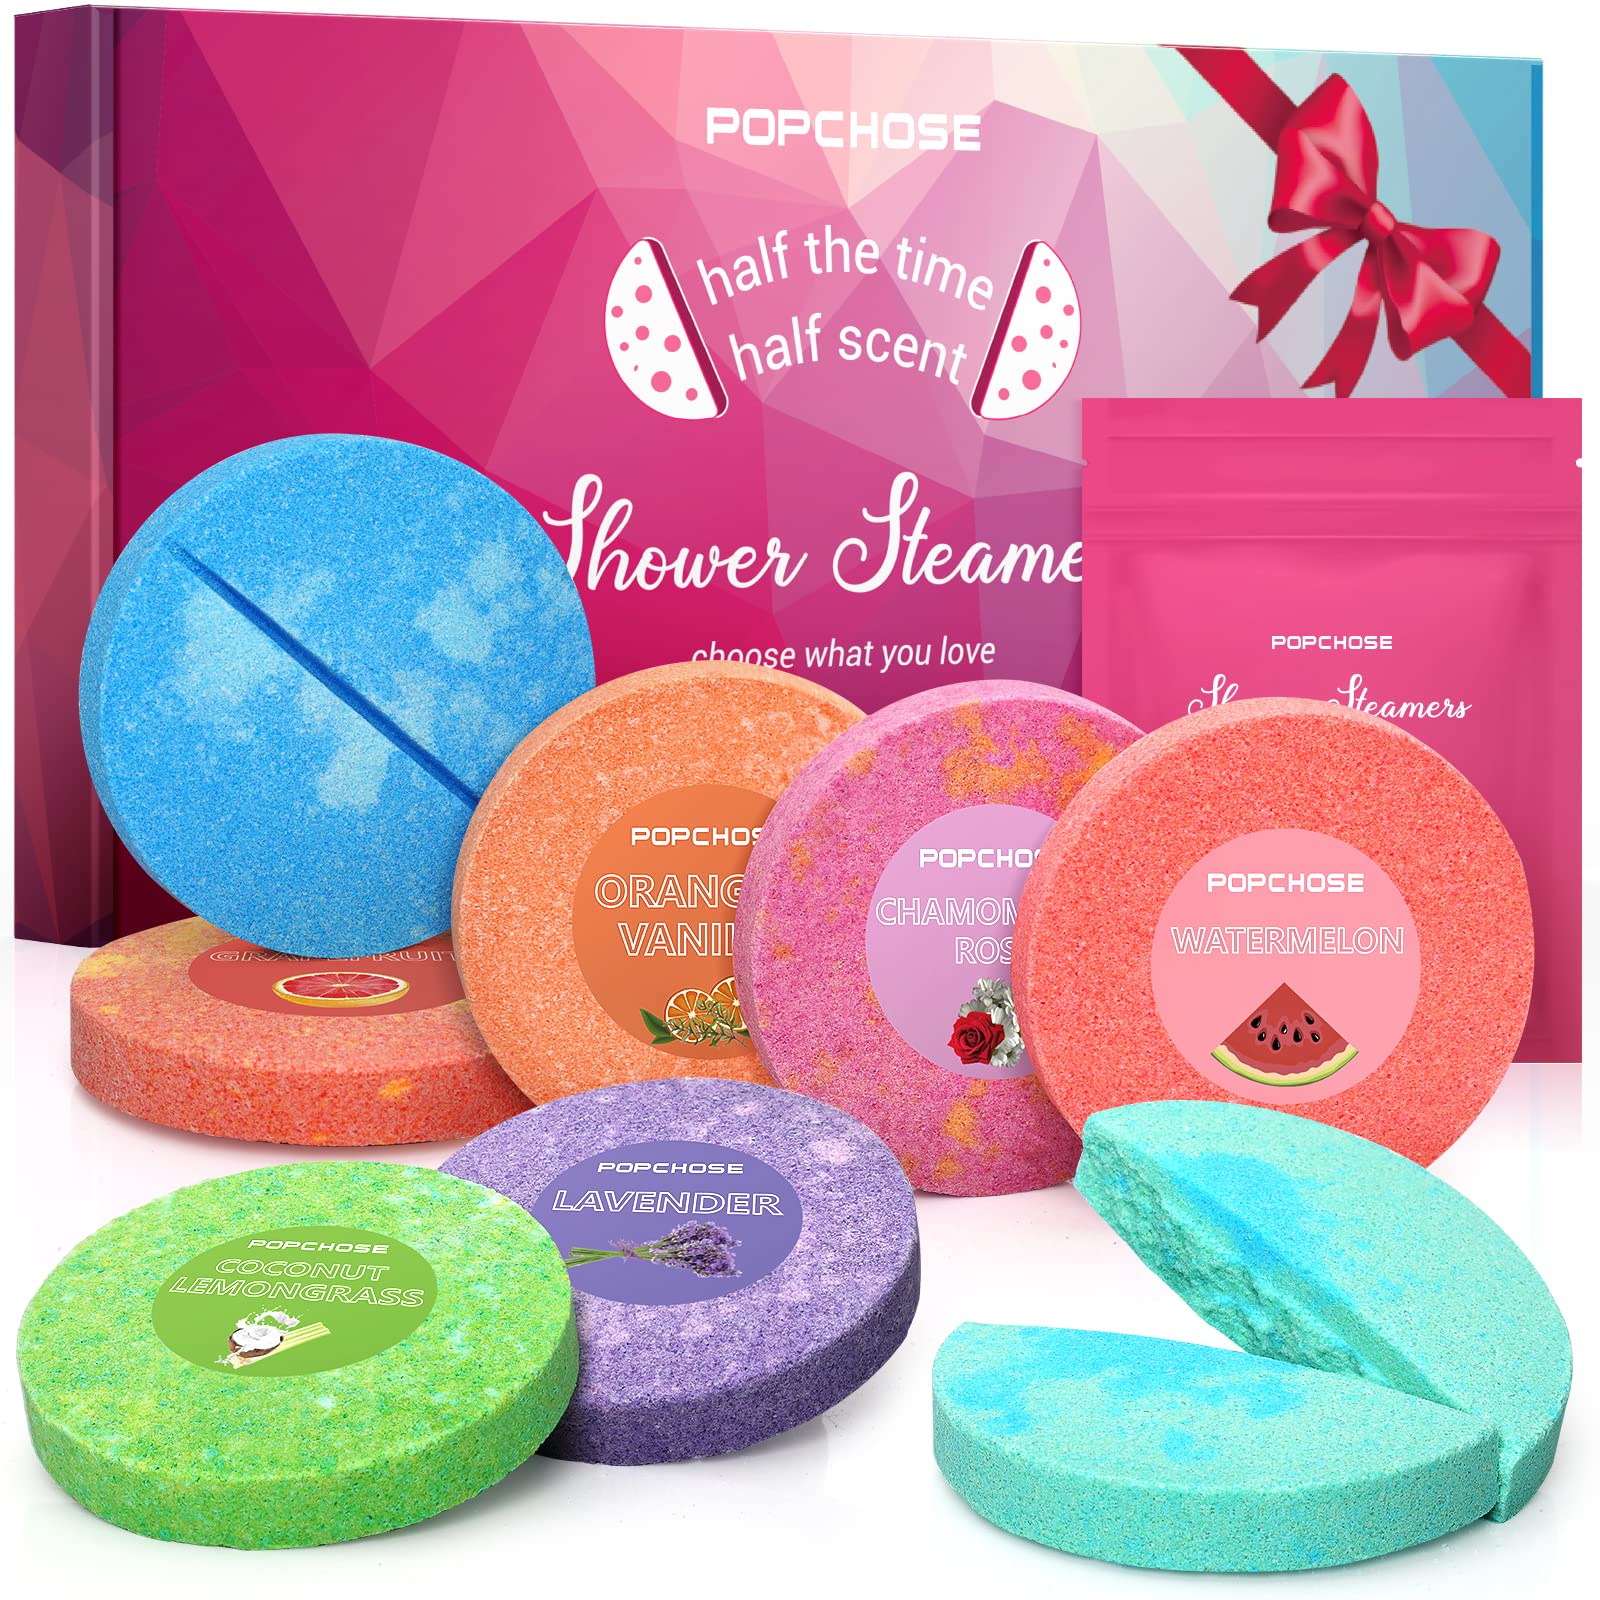 Shower Steamers Aromatherapy Stocking Stuffers for Women- Swcandy 8 Pcs  Bath Bombs Gifts for Women, Shower Bombs with Essential Oils Relaxation  Gifts